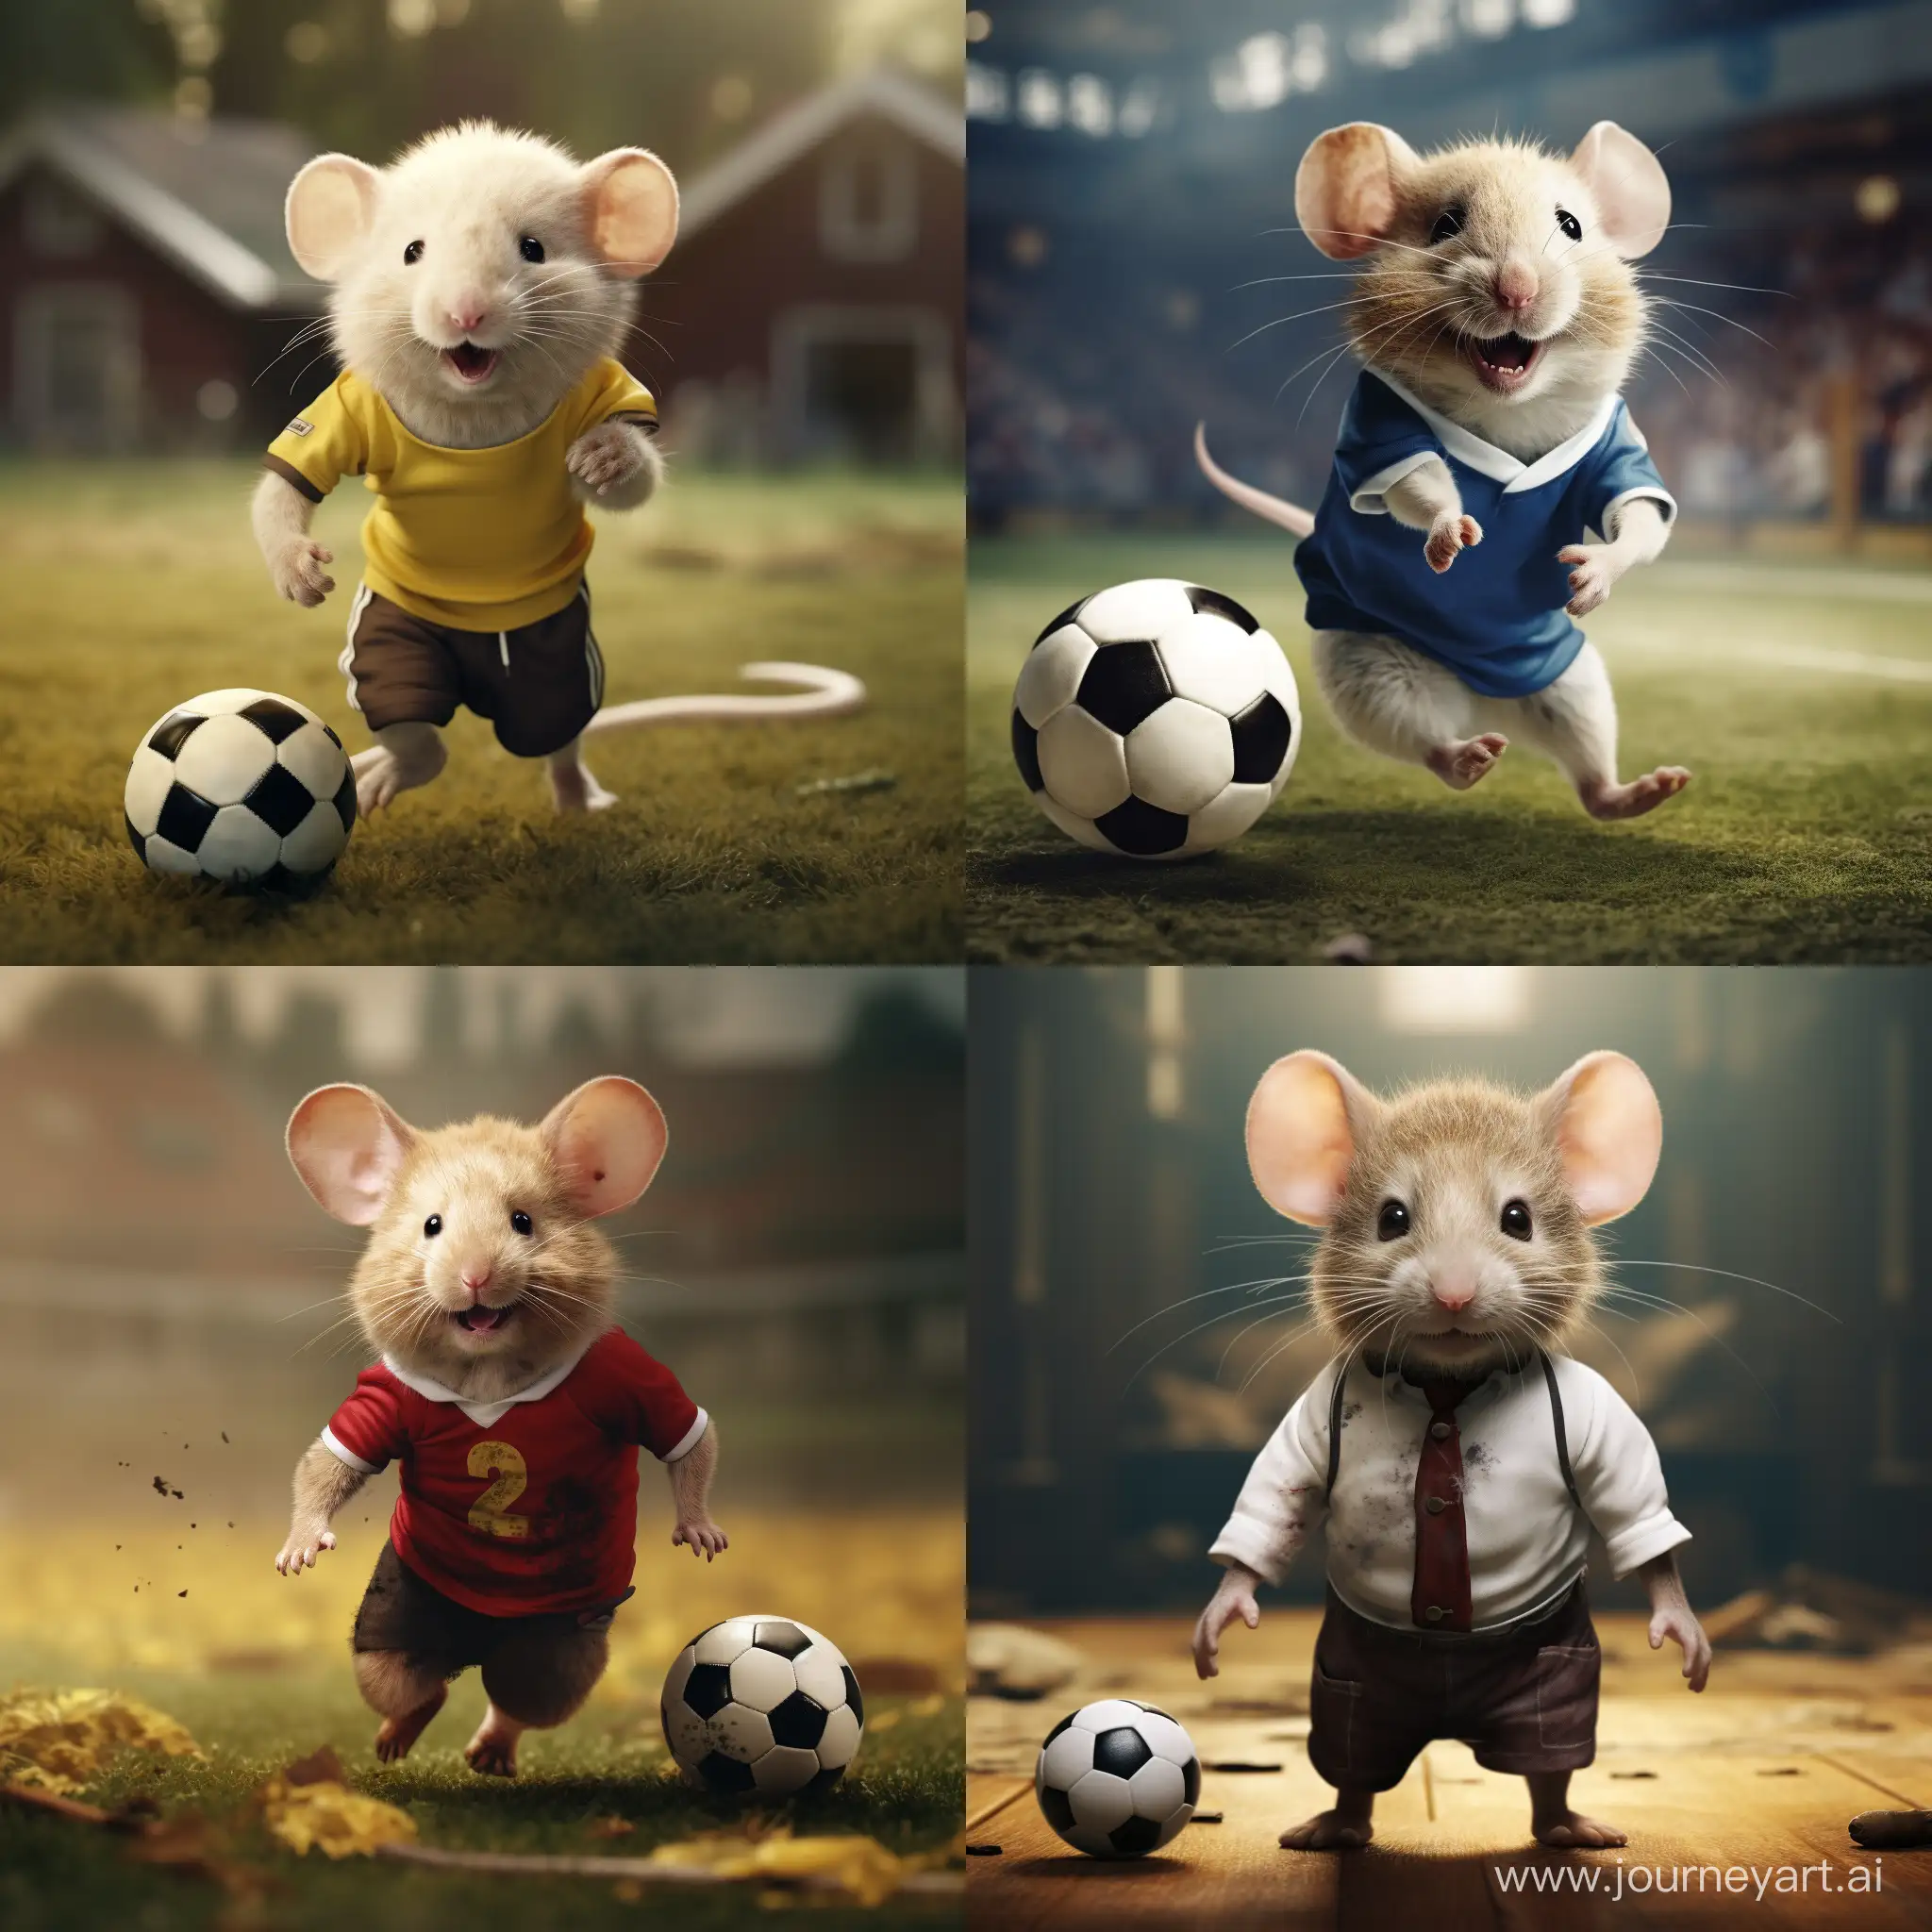 Realistic image of mouse playing football